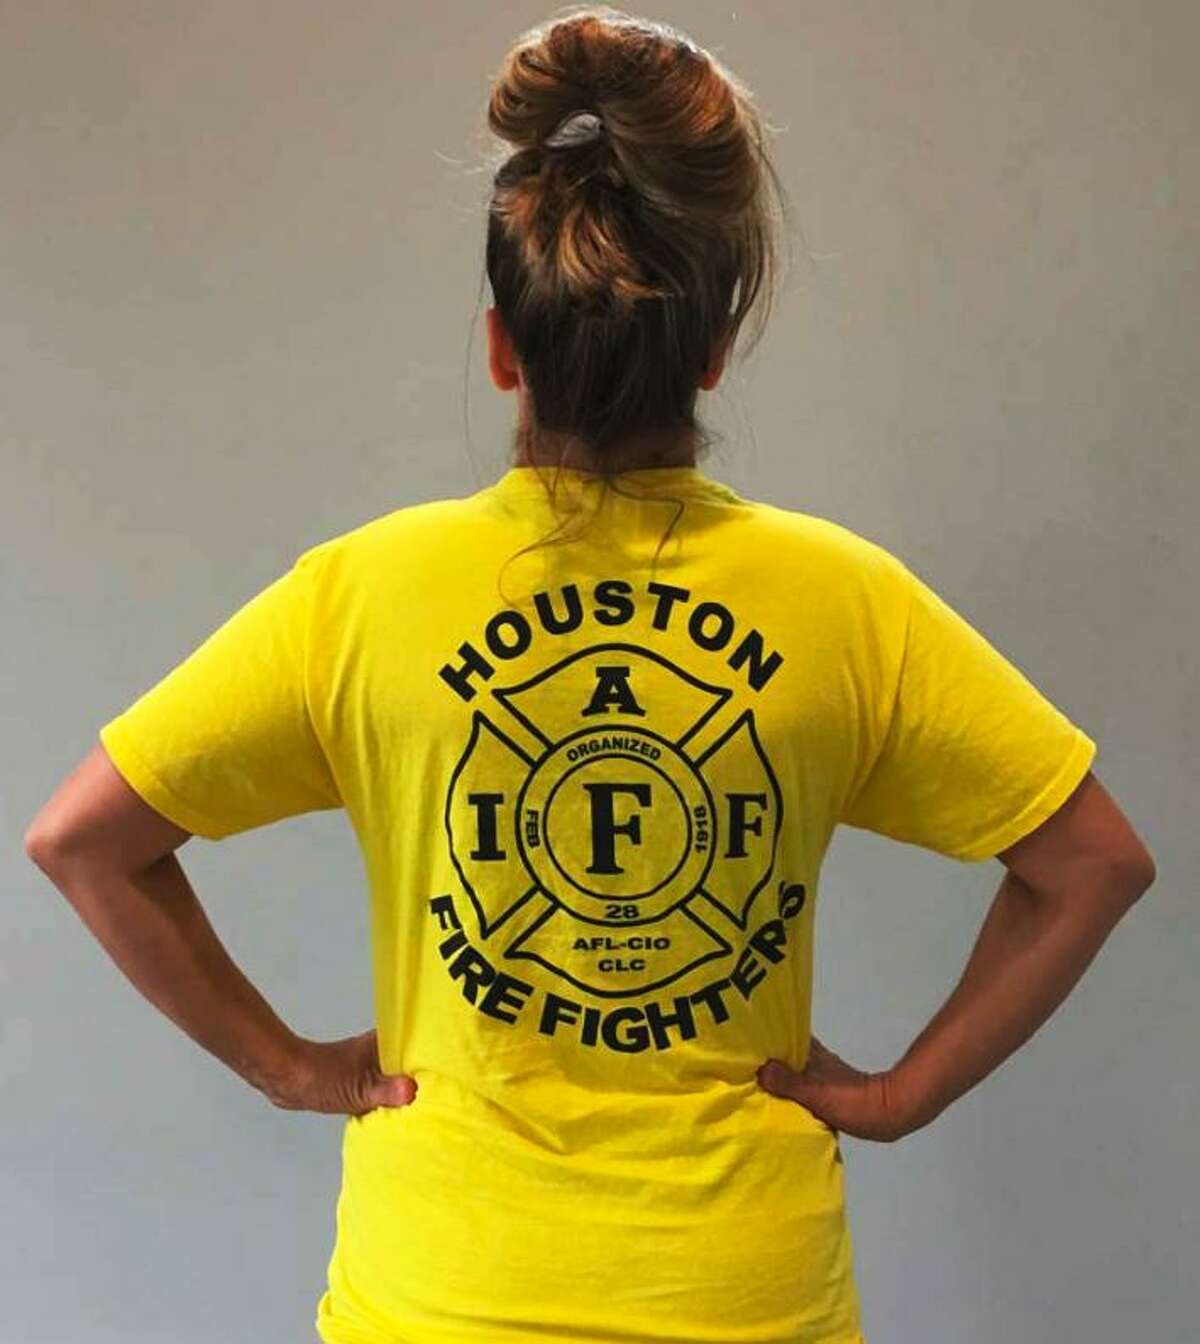 Jillian Ostrewich, who is married to a Houston firefighter, is pictured wearing the T-shirt she wore to a Harris County polling place for early voting in October 2018, when a pay parity measure for firefighters was on the ballot. According to court documents, election officials told her she could not cast her vote with the logo showing, so she turned her T-shirt inside out and was able to proceed.